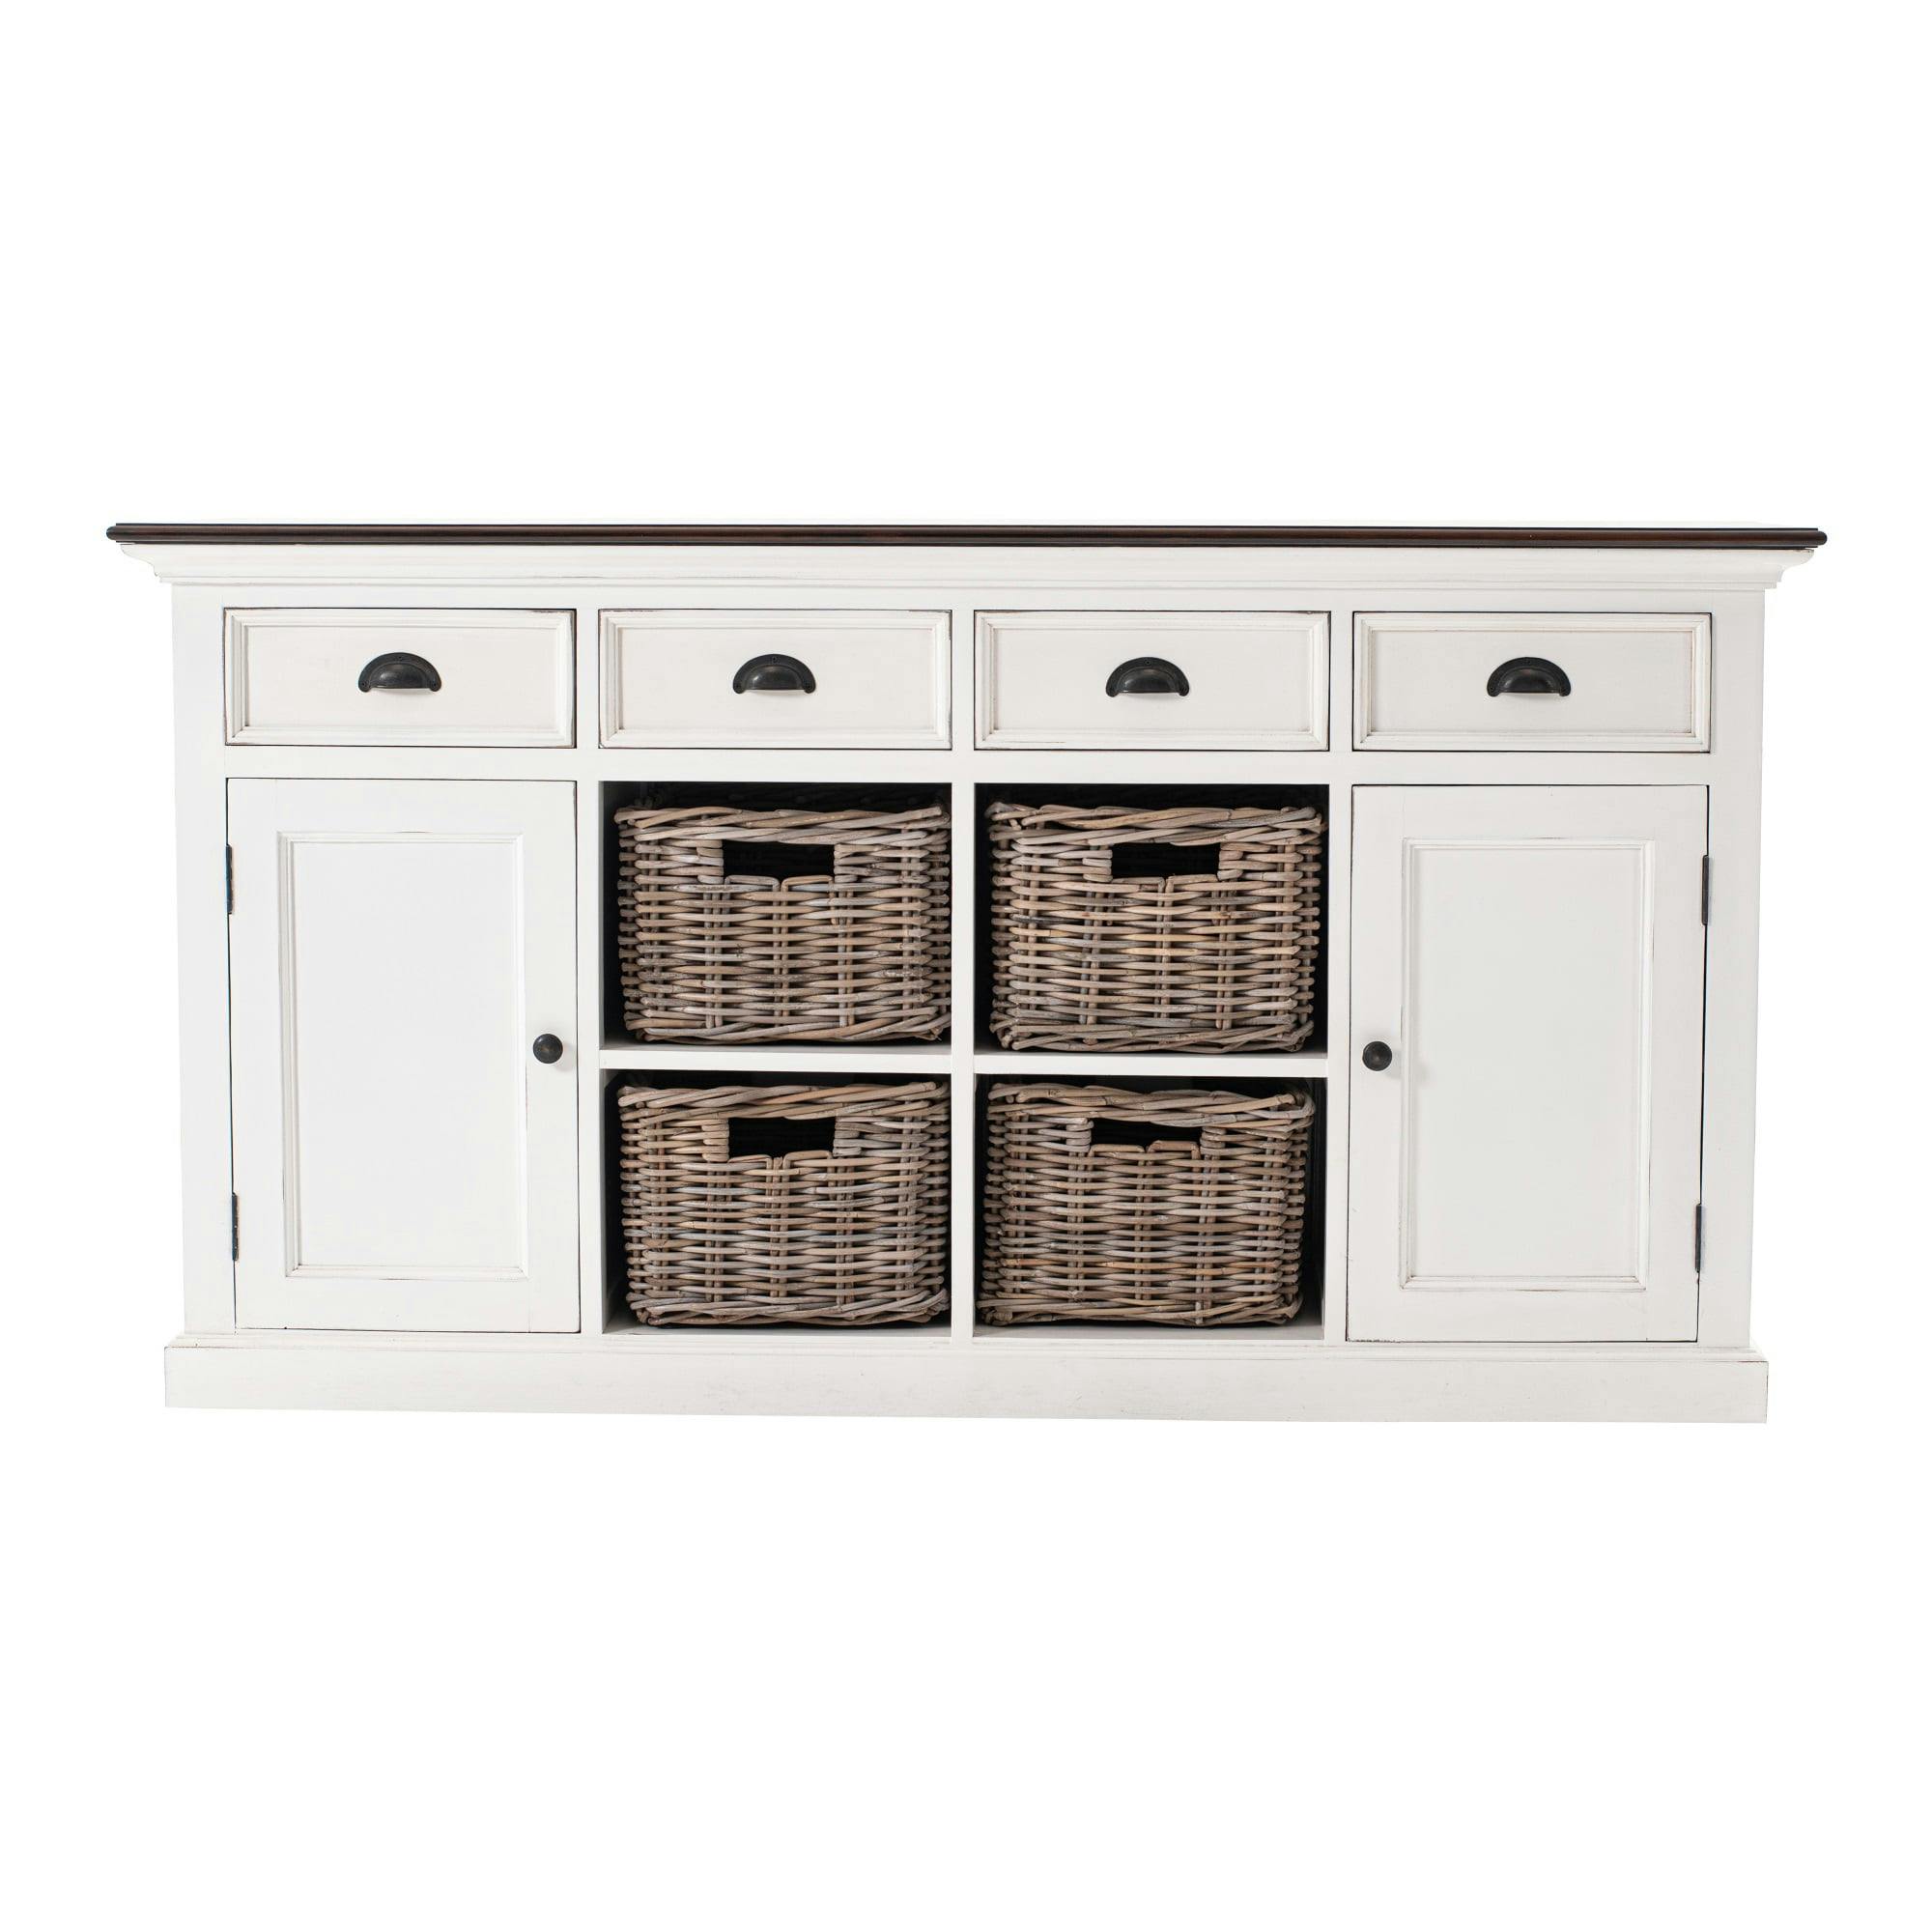 Halifax Solid Mahogany Wood Buffet in White with Hand-Woven Rattan Baskets